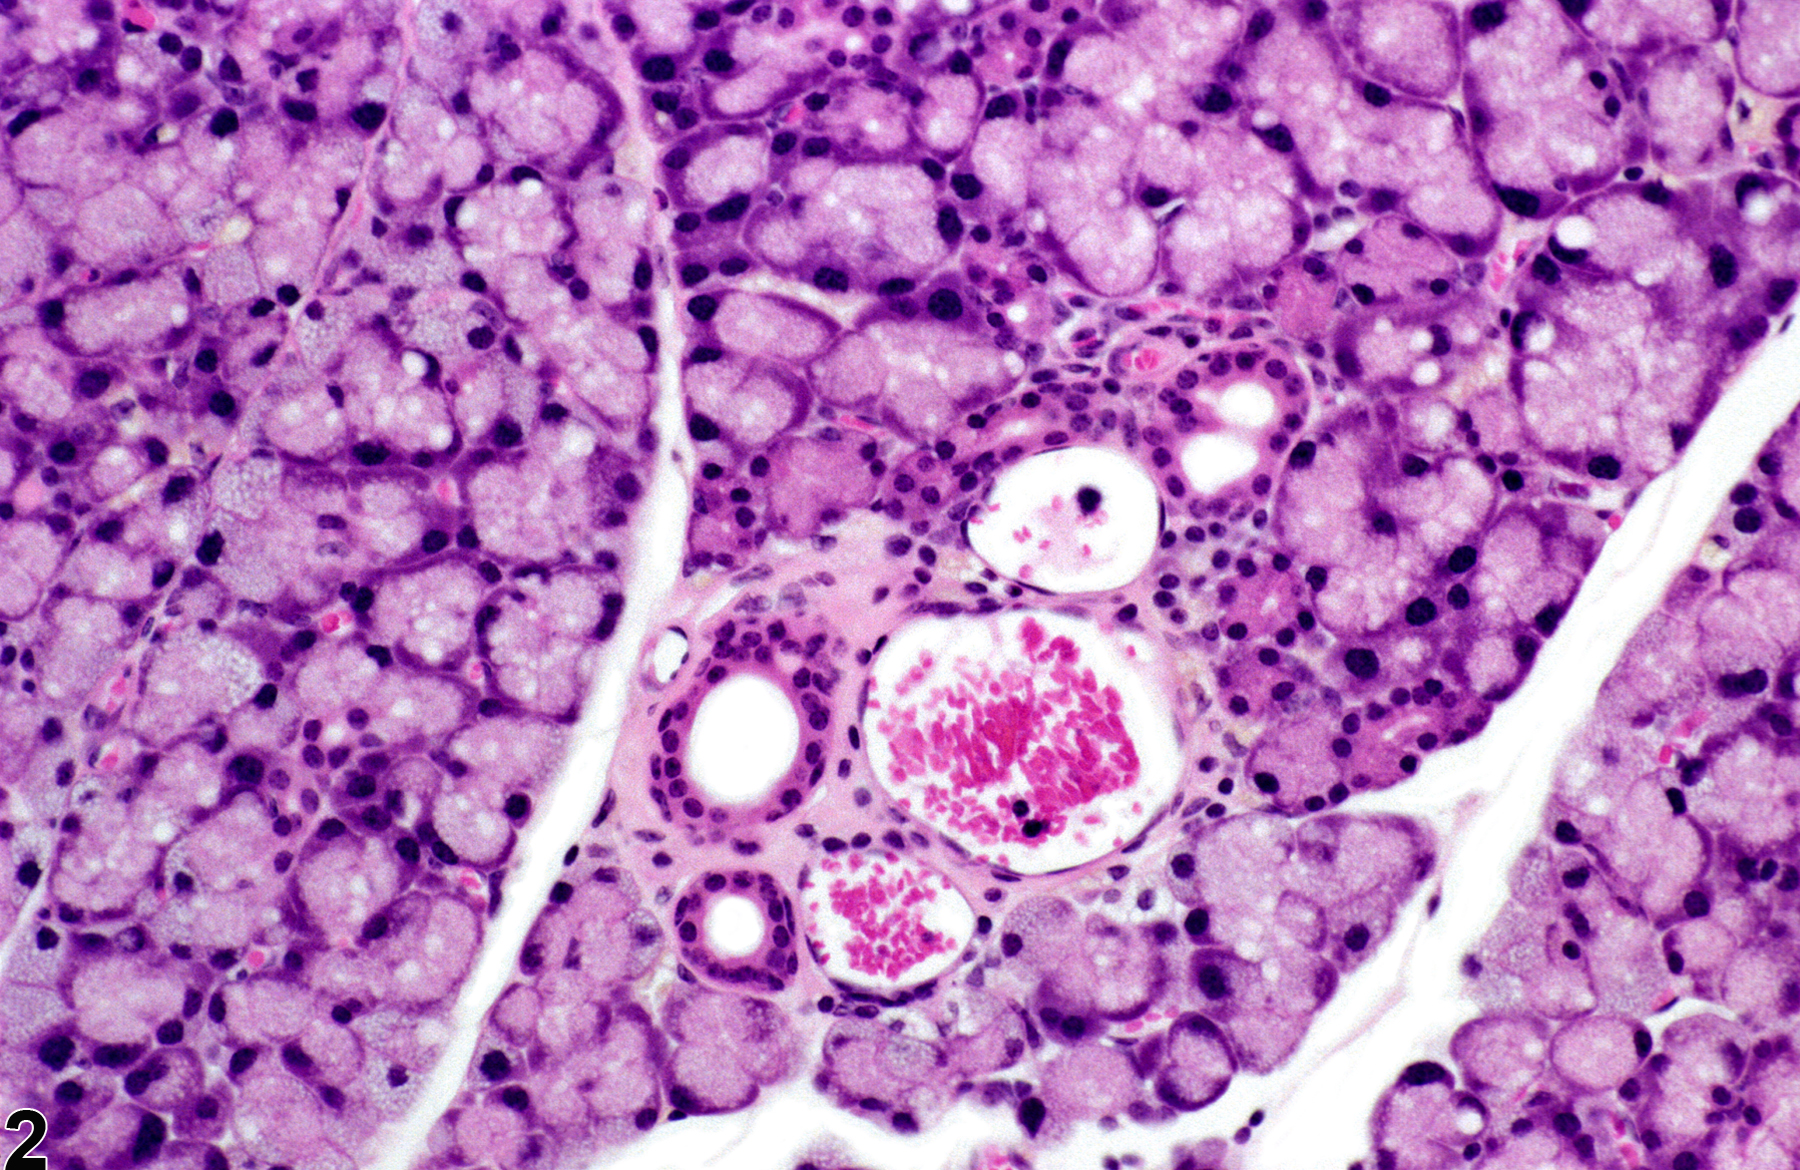 Image of karyomegaly in the lacrimal gland from a male B6C3F1 mouse in a chronic study